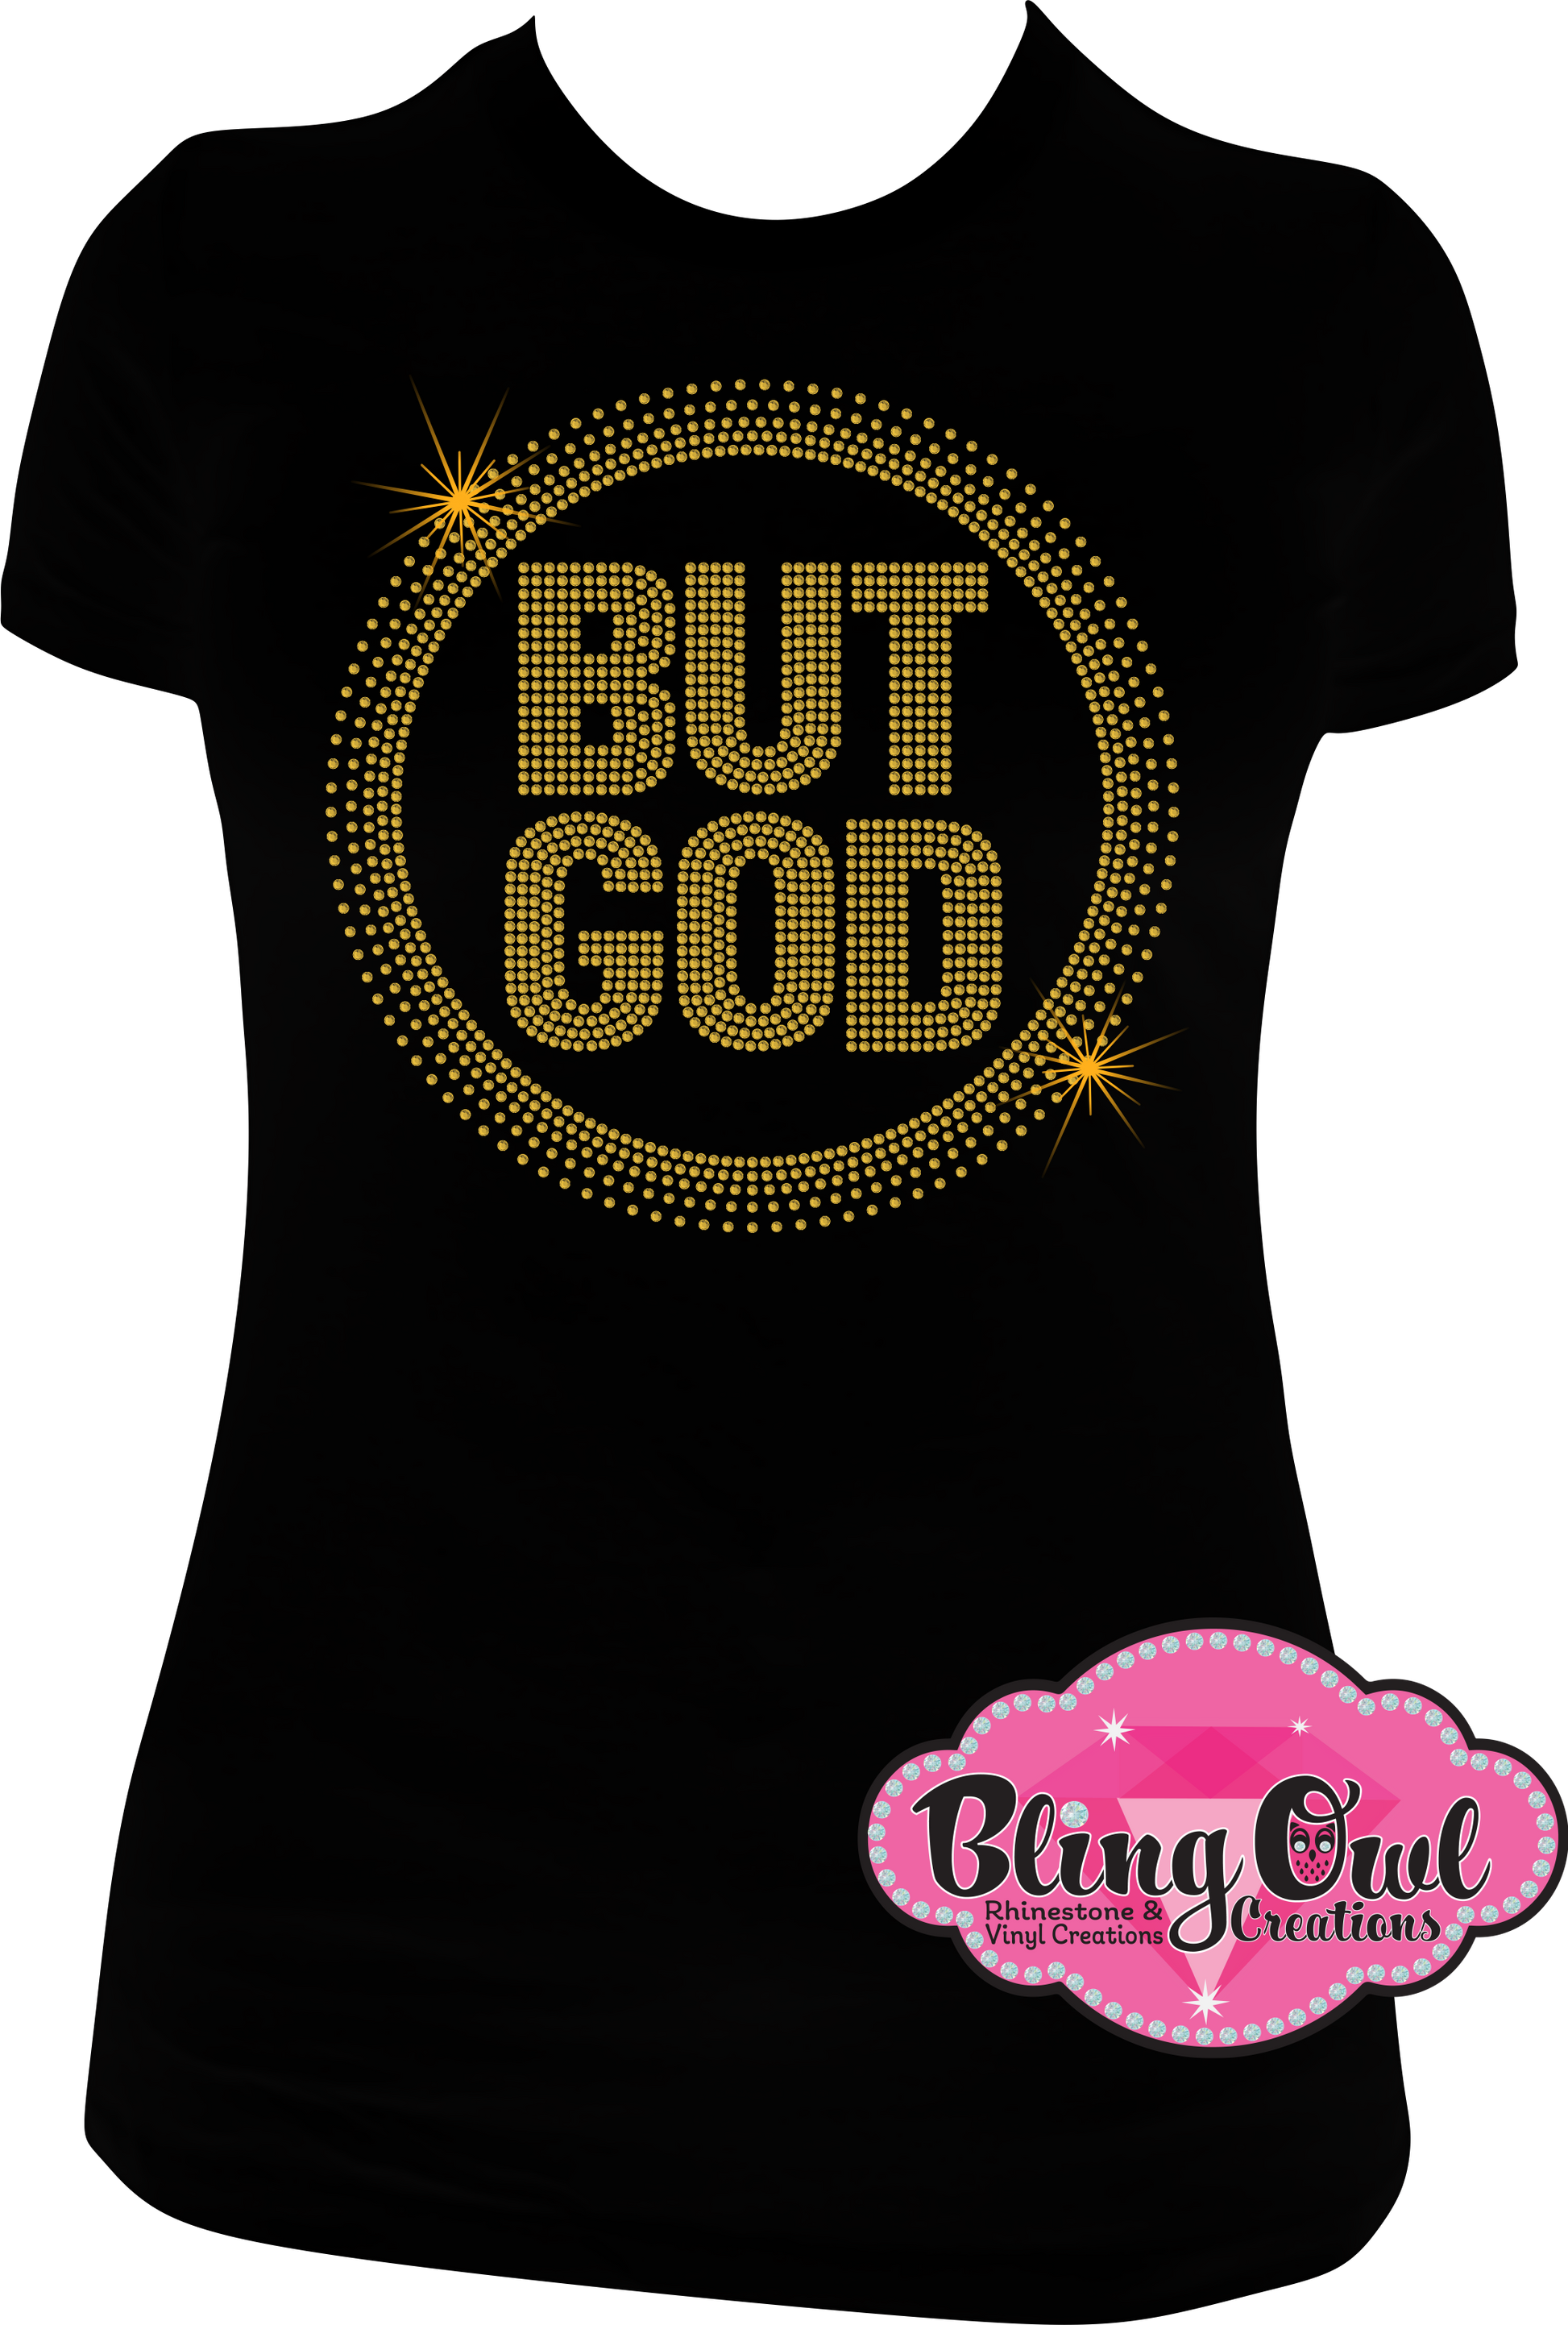 God_in_gold fitted shirt rhinestones sparkle bling